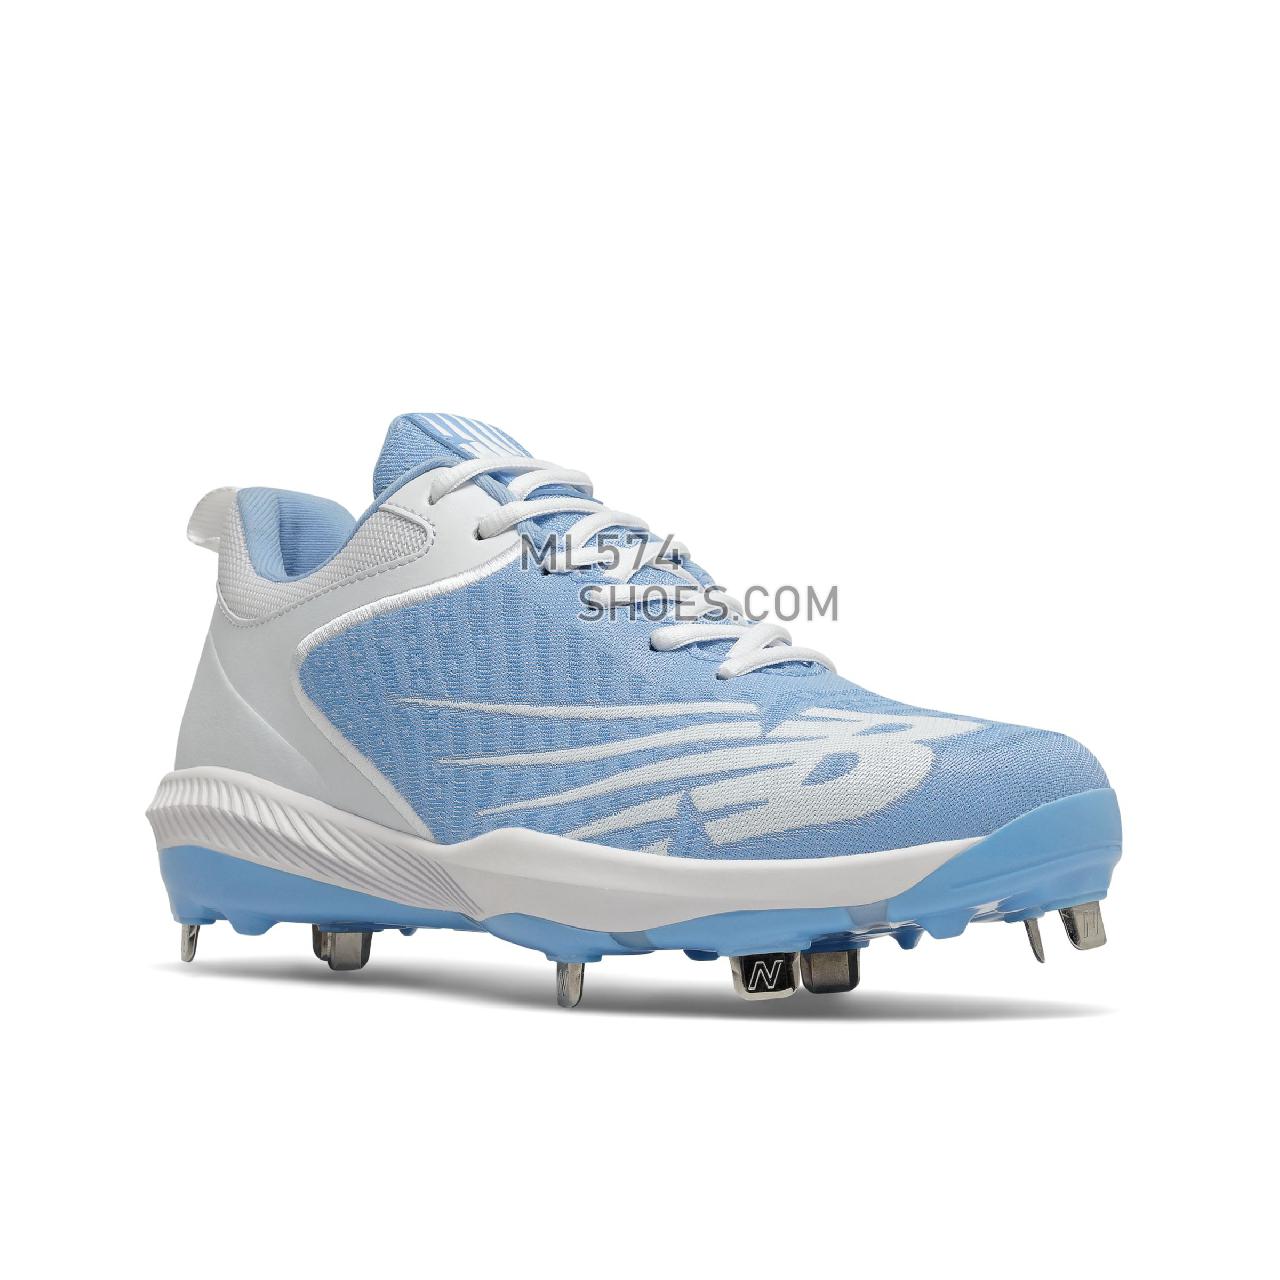 New Balance FuelCell 4040 v6 Metal - Men's Mid-Cut Baseball Cleats - Team Carolina with White - L4040SD6